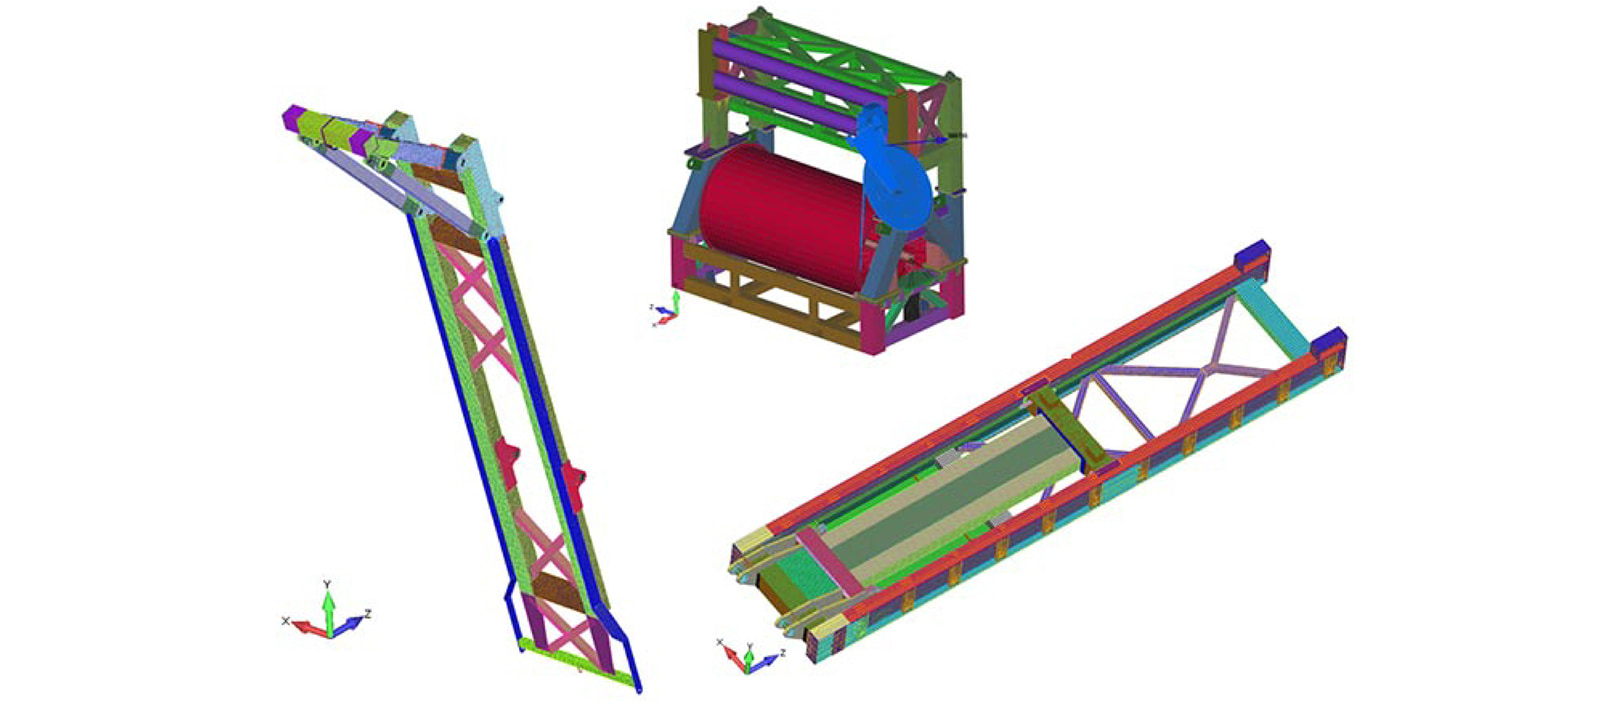 Some views of Femap model using for the ship-mounted crane.  The model was run “piece parted” since each structure acts independently of each other.  A winch frame was also analyzed and sits on the far right of the base structure.  